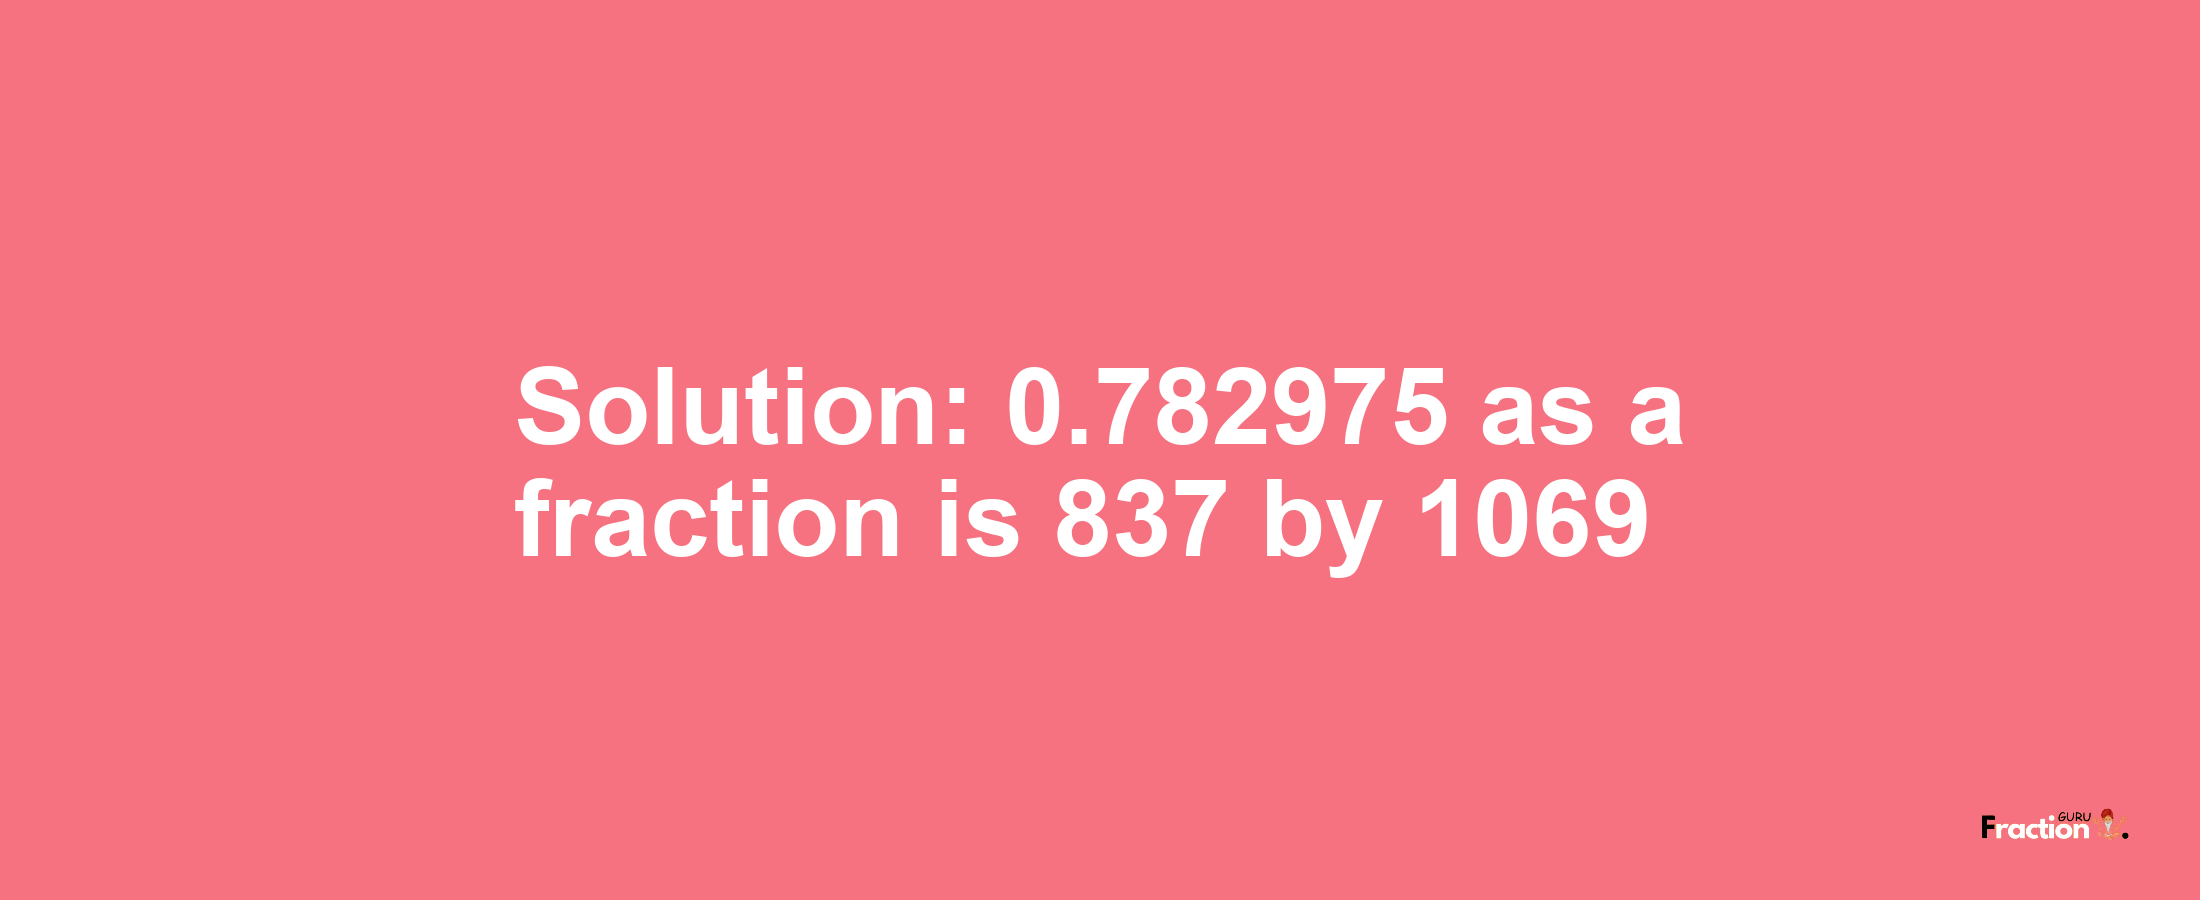 Solution:0.782975 as a fraction is 837/1069